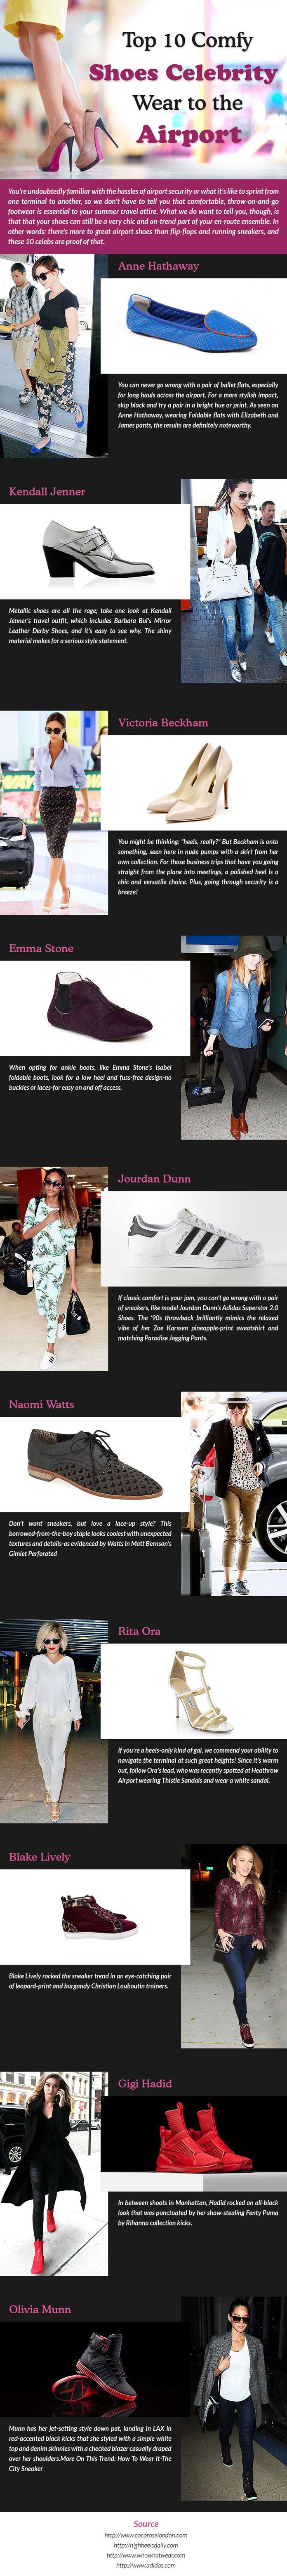 Top 10 Comfy Shoes Celebrity Wear to The Airport